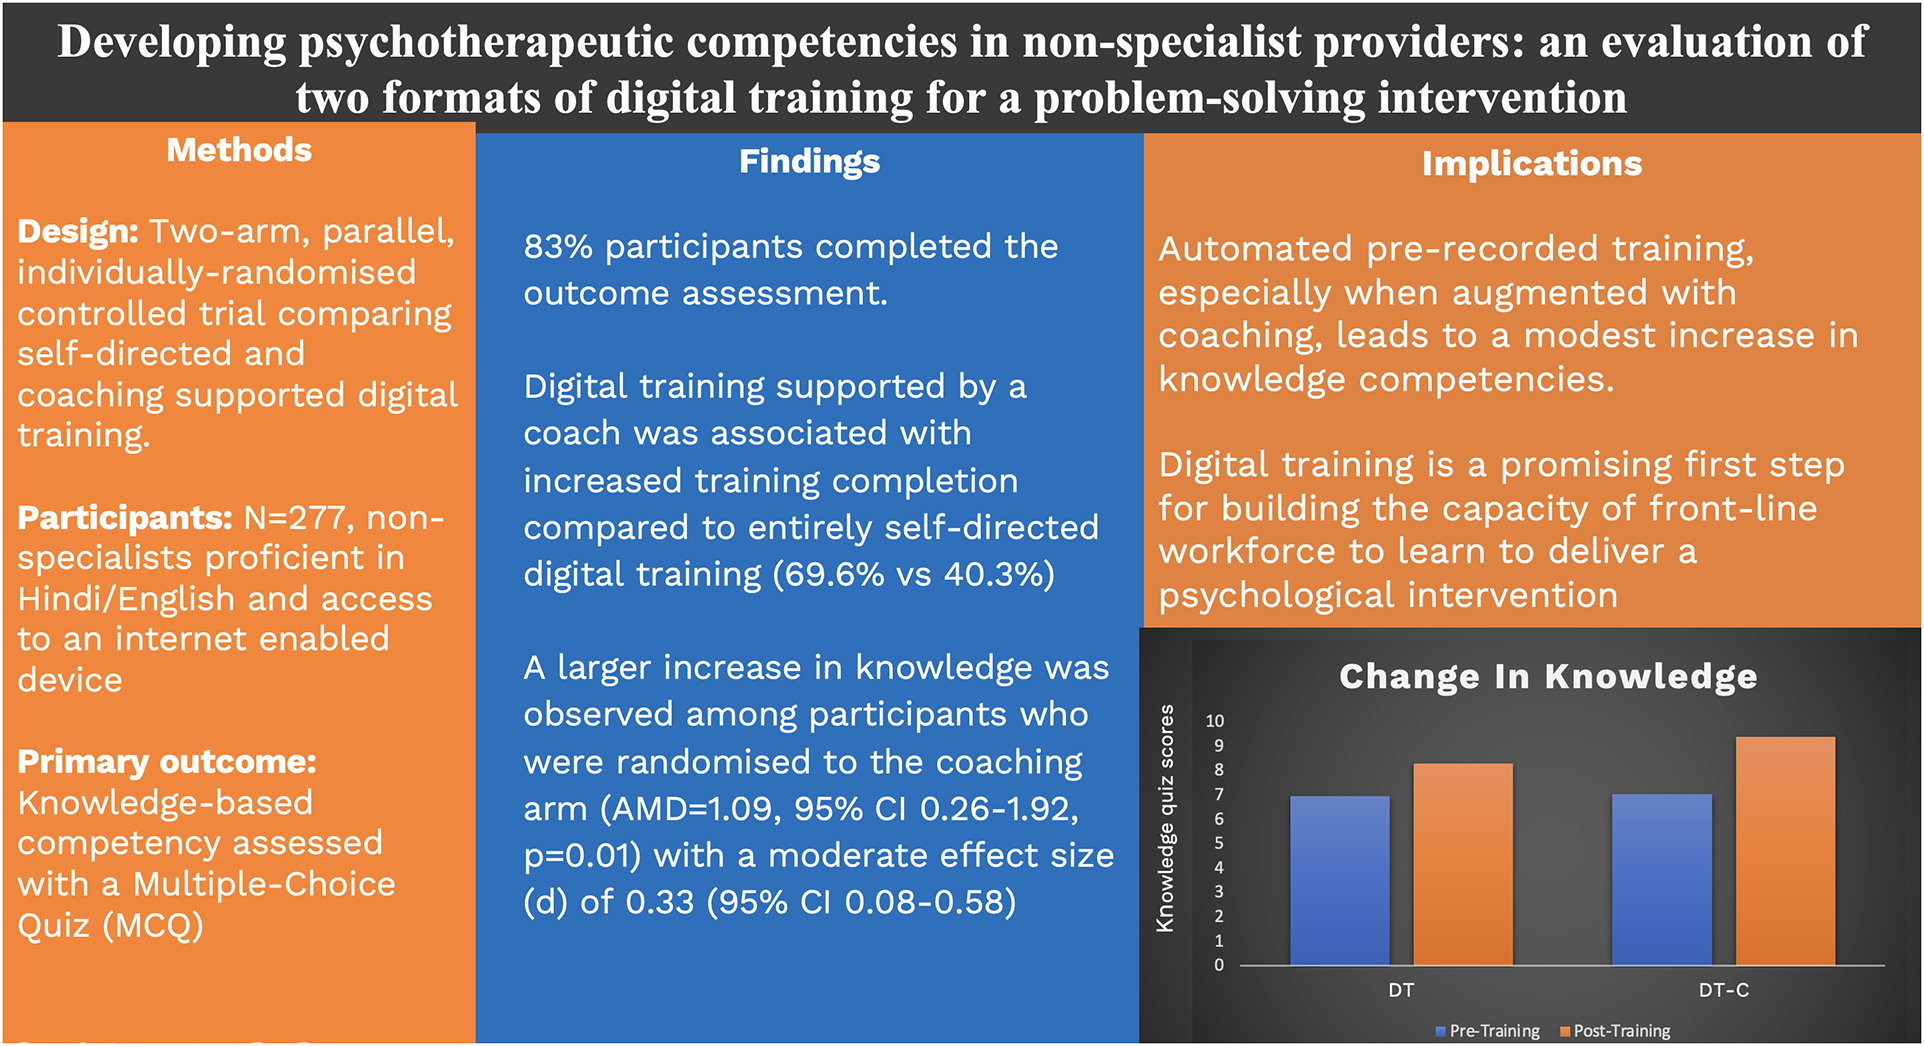 graphical abstract for Developing knowledge-based psychotherapeutic competencies in non-specialist providers: A pre-post study with a nested randomised controlled trial of a coach-supported versus self-guided digital training course for a problem-solving psychological intervention in India - open in full screen